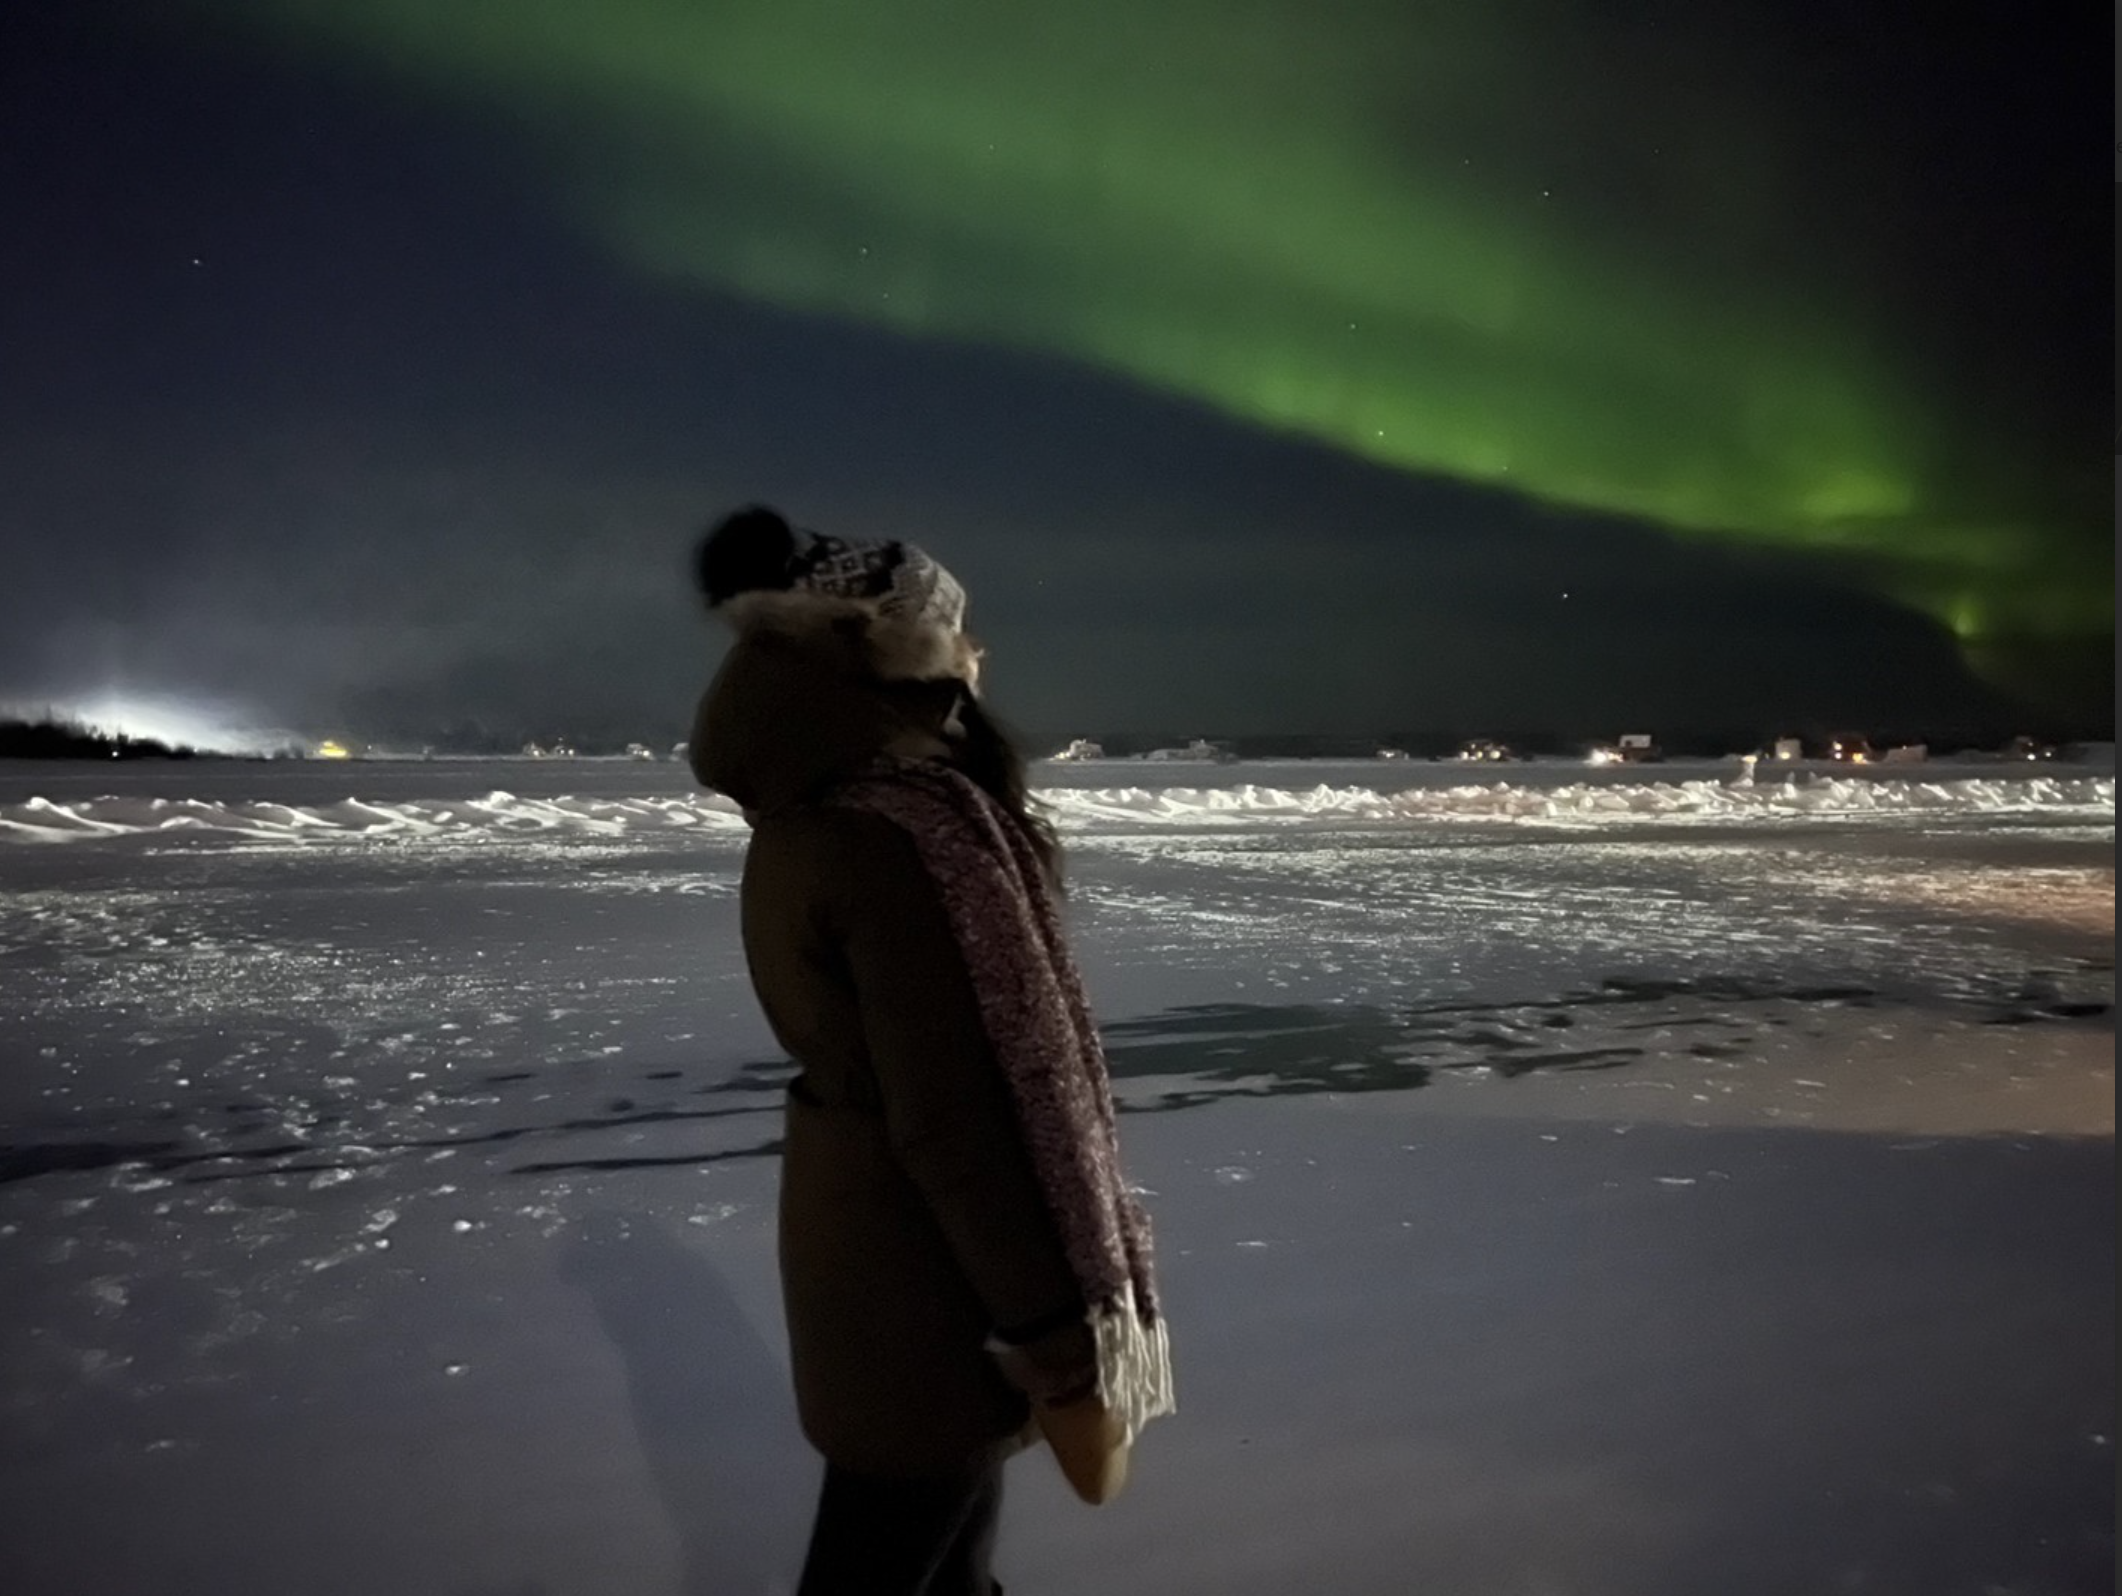 Michaela viewing the Northern Lights in the North West Territories